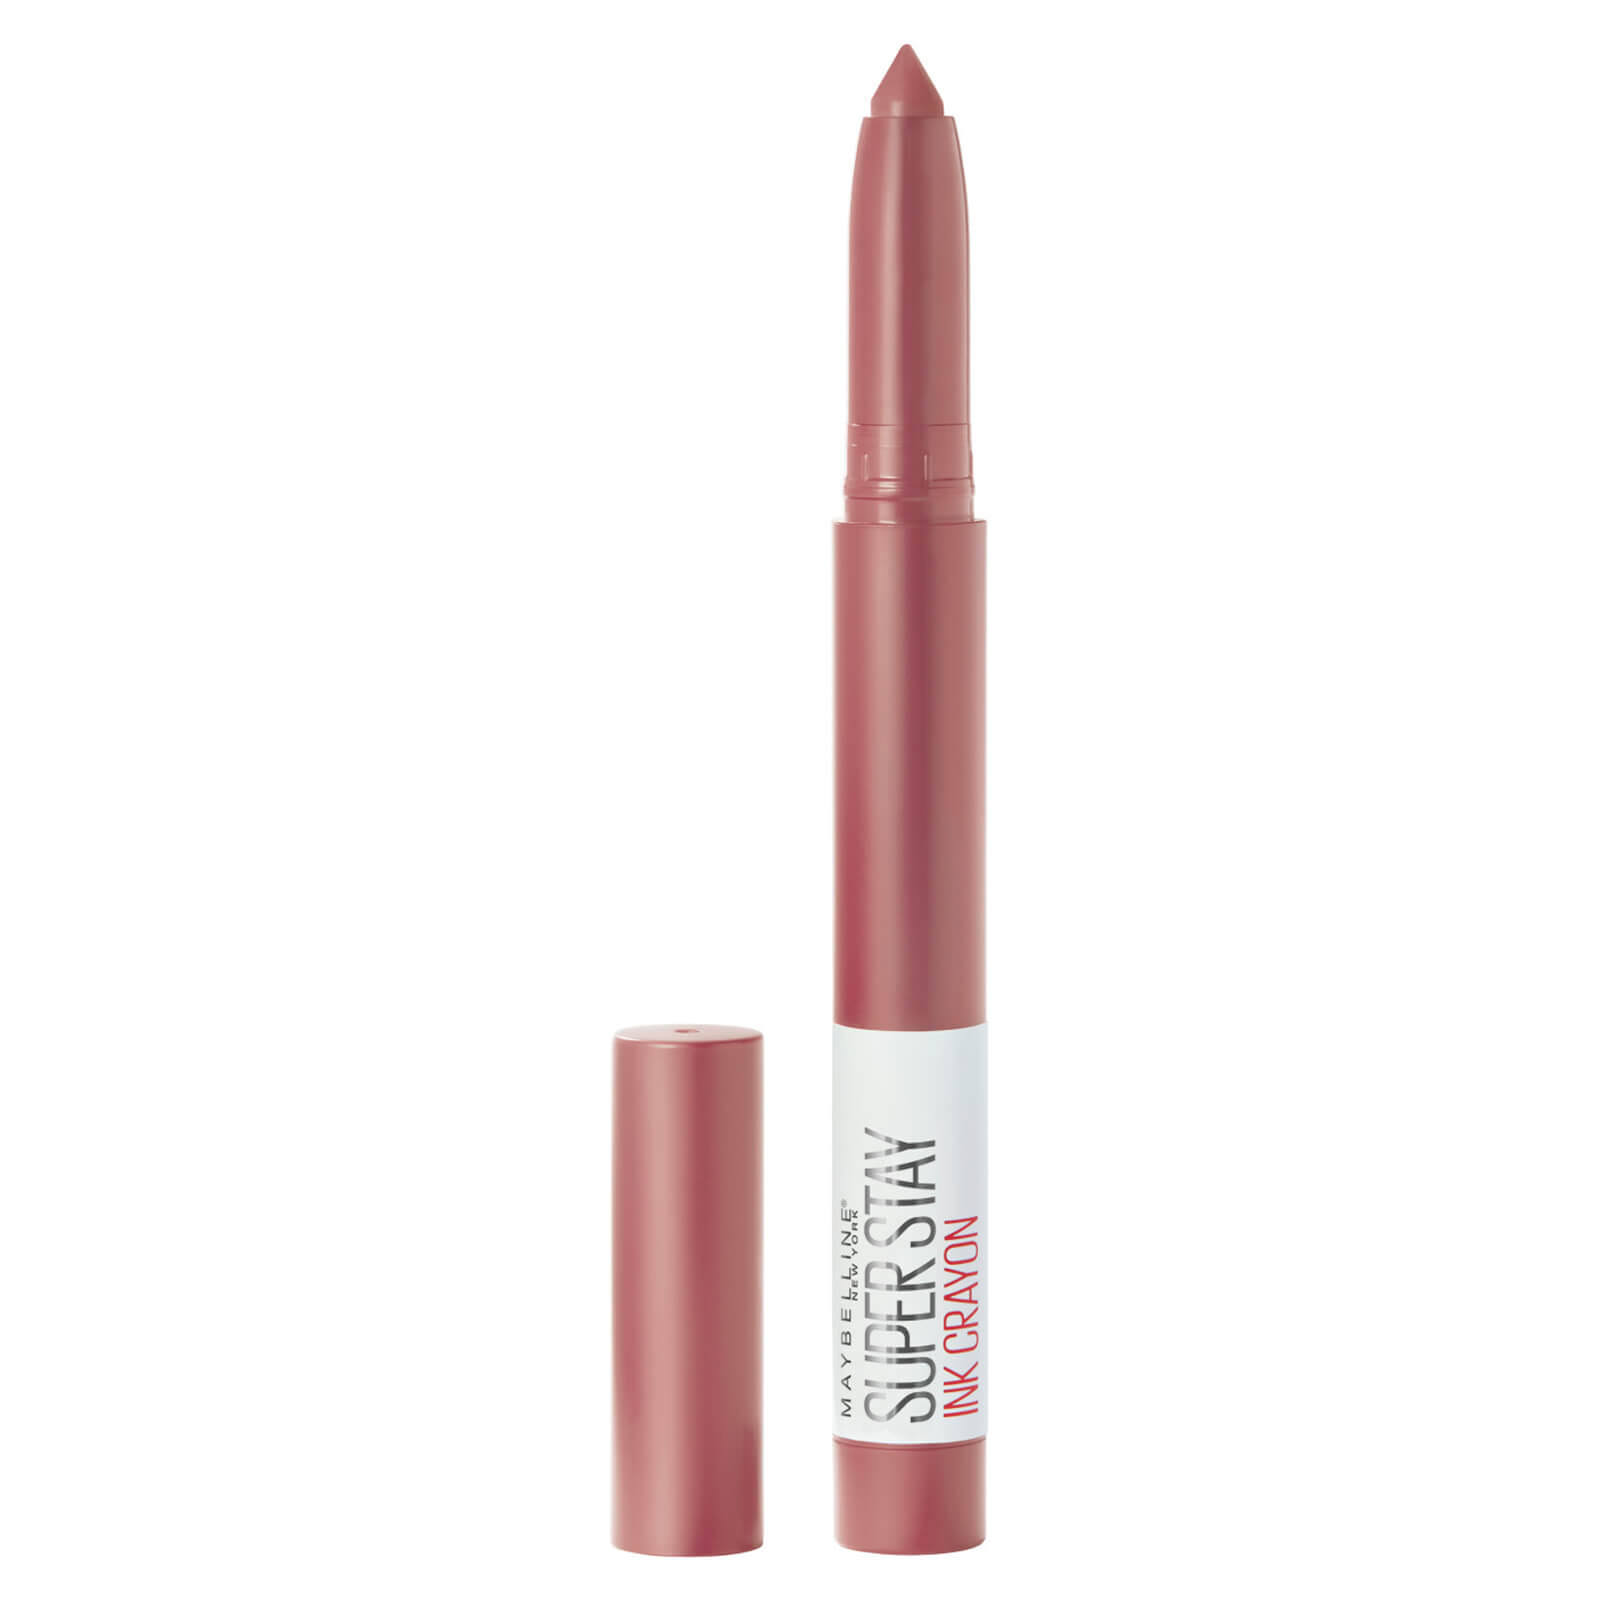 Maybelline Superstay Matte Ink Crayon Lipstick - Lead The Way